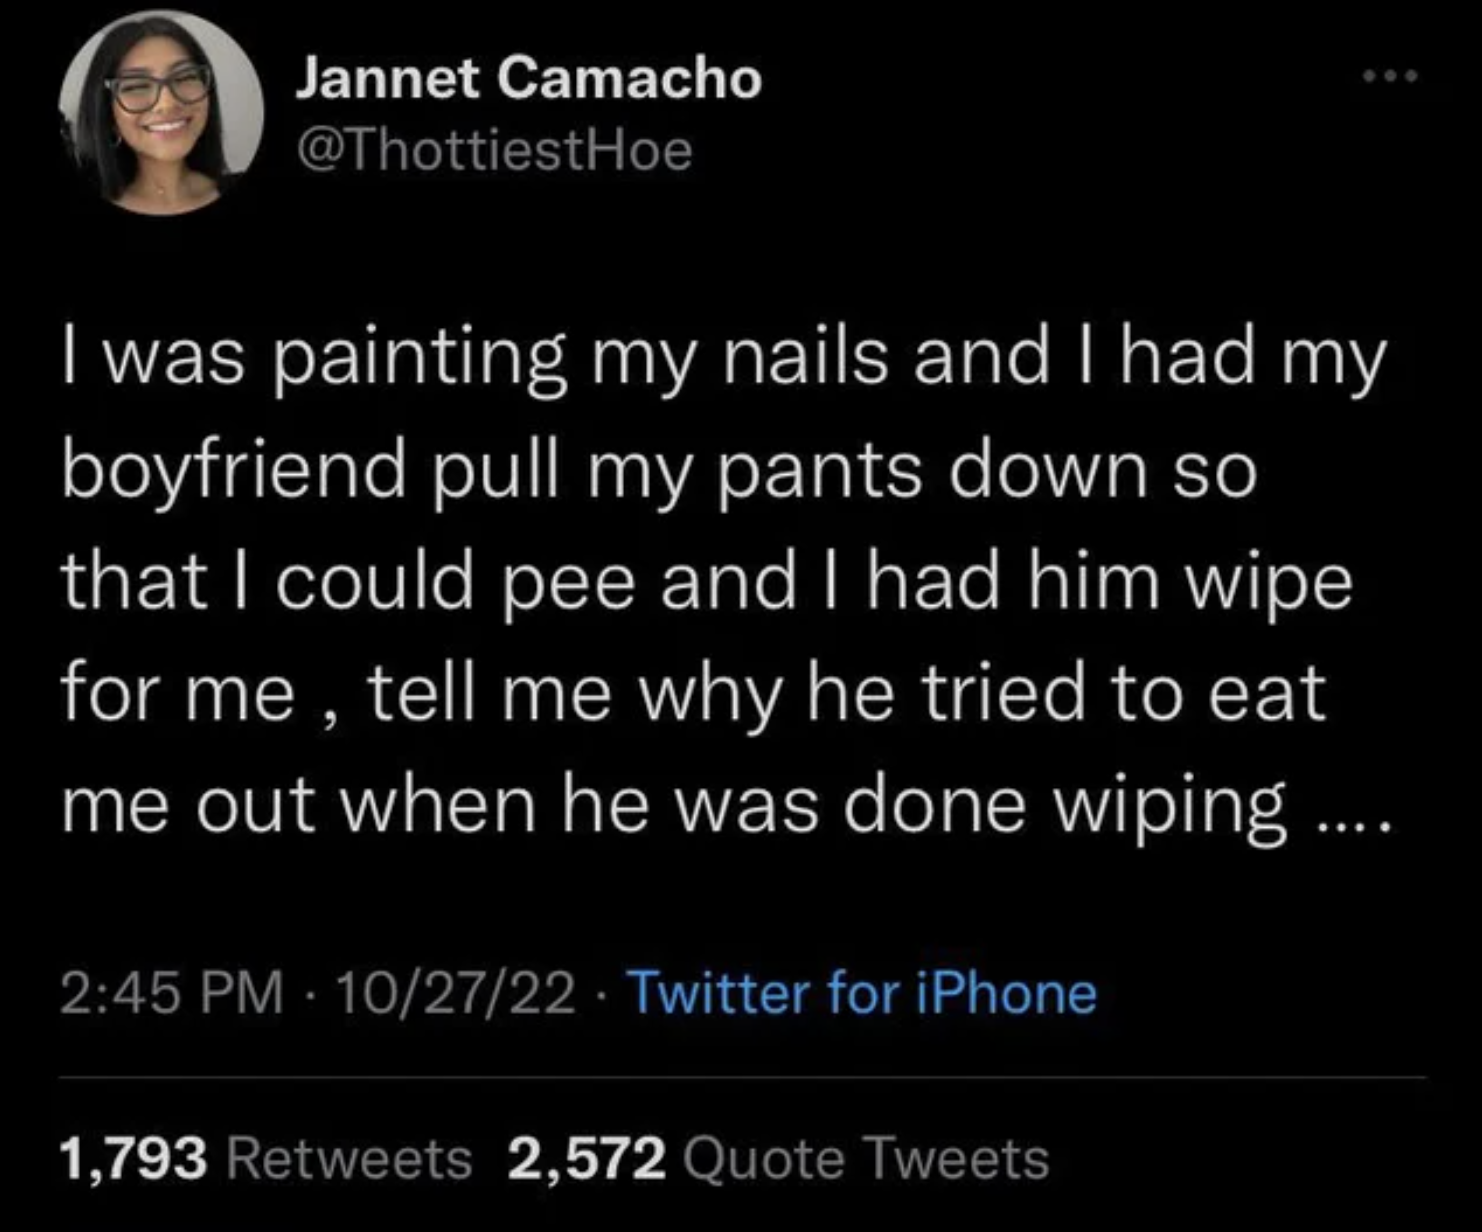 Cringey pics - I was painting my nails and I had my boyfriend pull my pants down so that I could pee and I had him wipe for me, tell me why he tried to eat me out when he was done wiping.